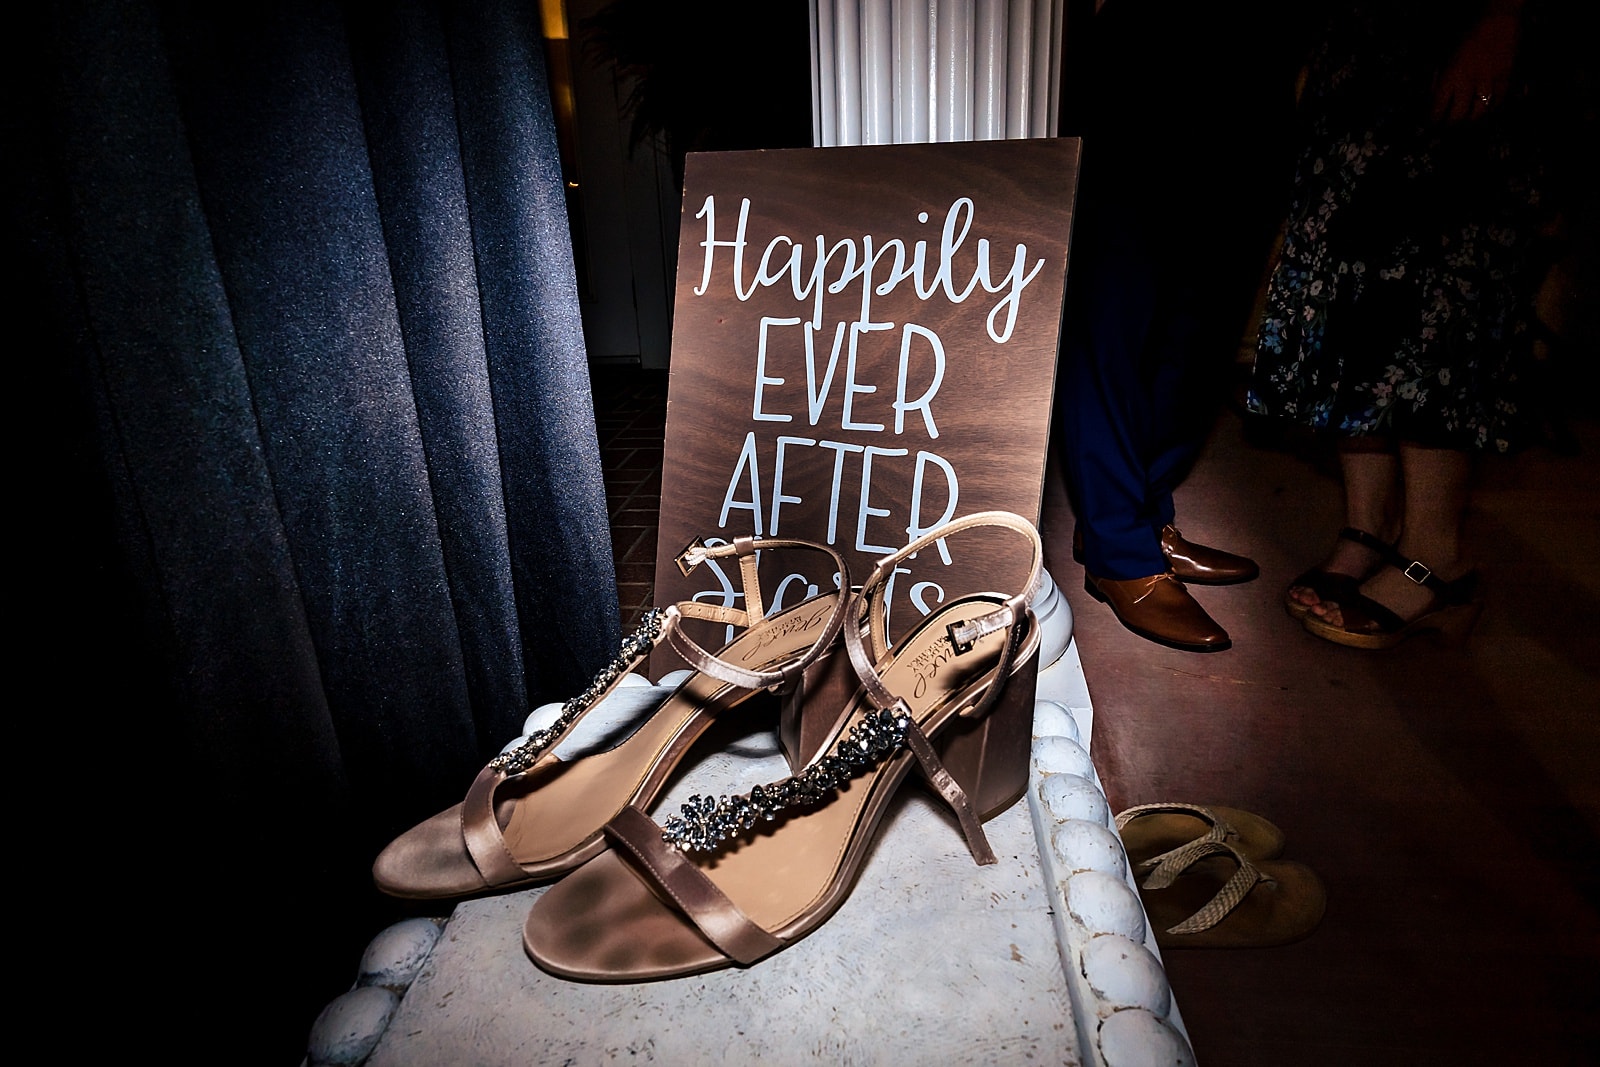 shoes on the edges of the dance floor are always a good indicator of an awesome dance party